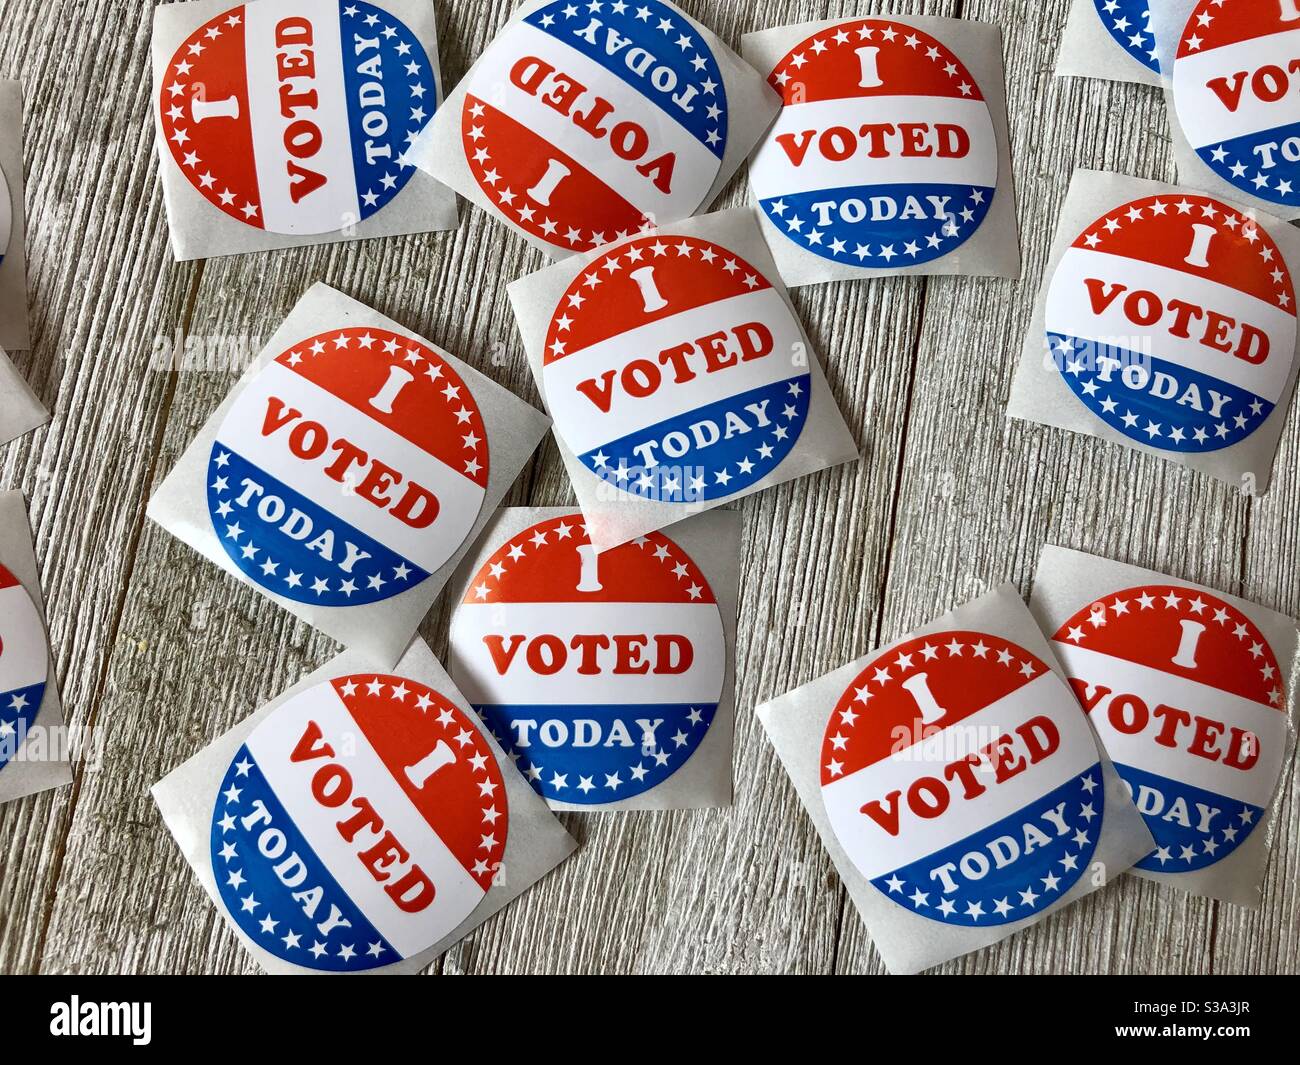 I voted stickers on a wooden surface Stock Photo